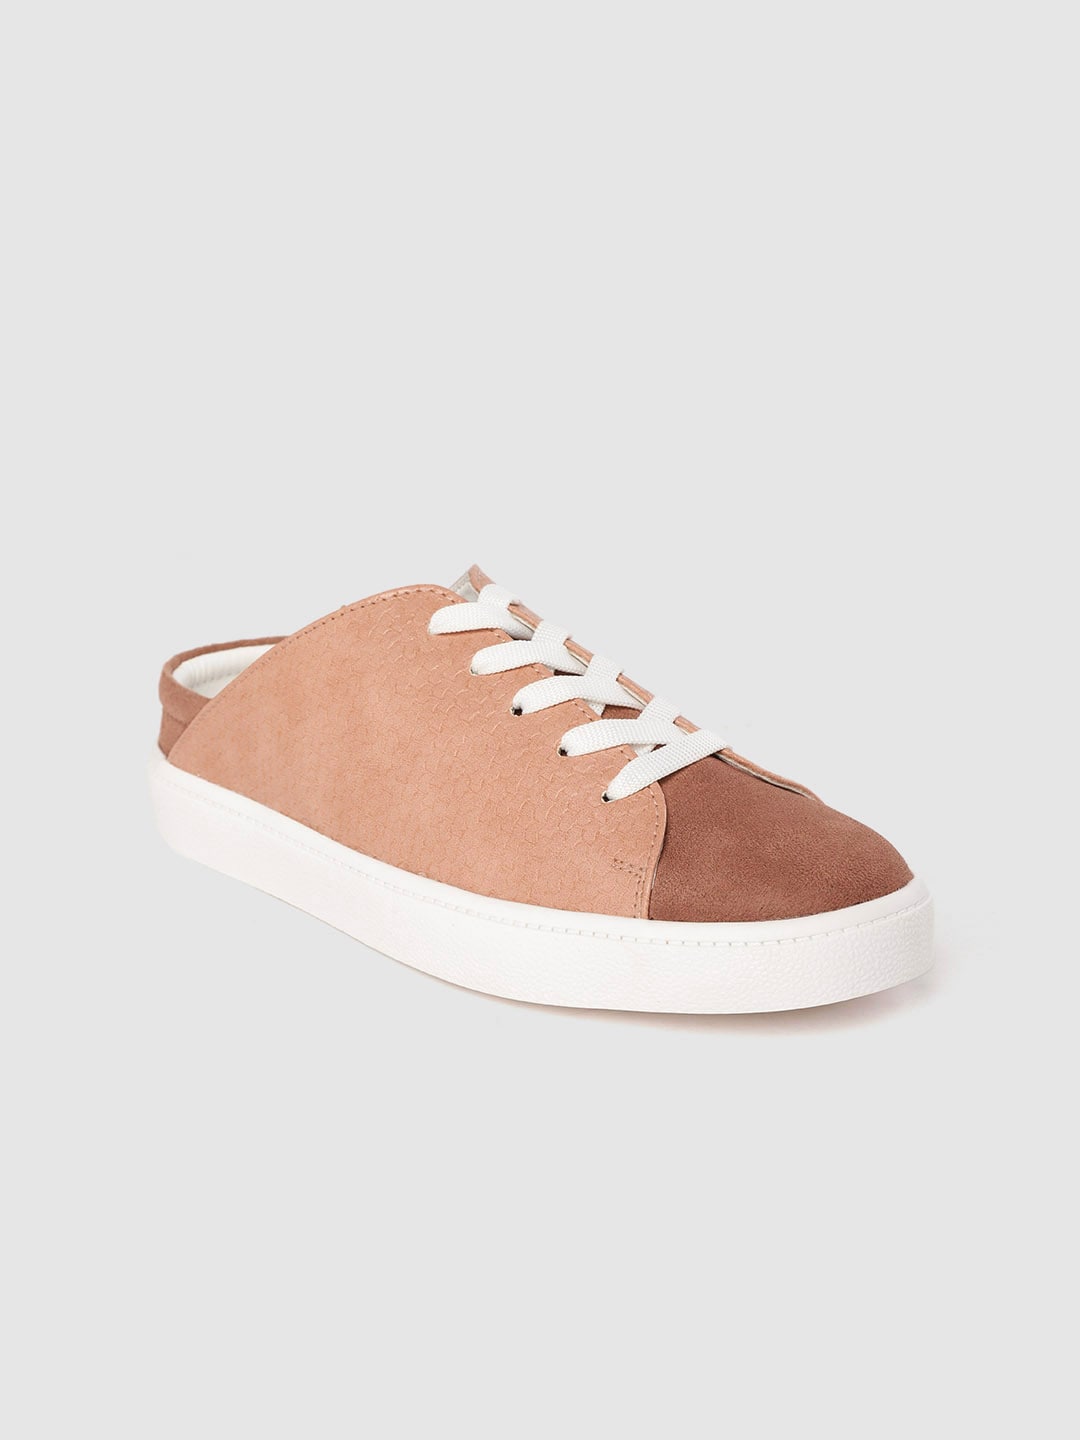 Mast & Harbour Women Peach-Coloured & Dusty Pink Textured & Colourblocked Mule Sneakers Price in India